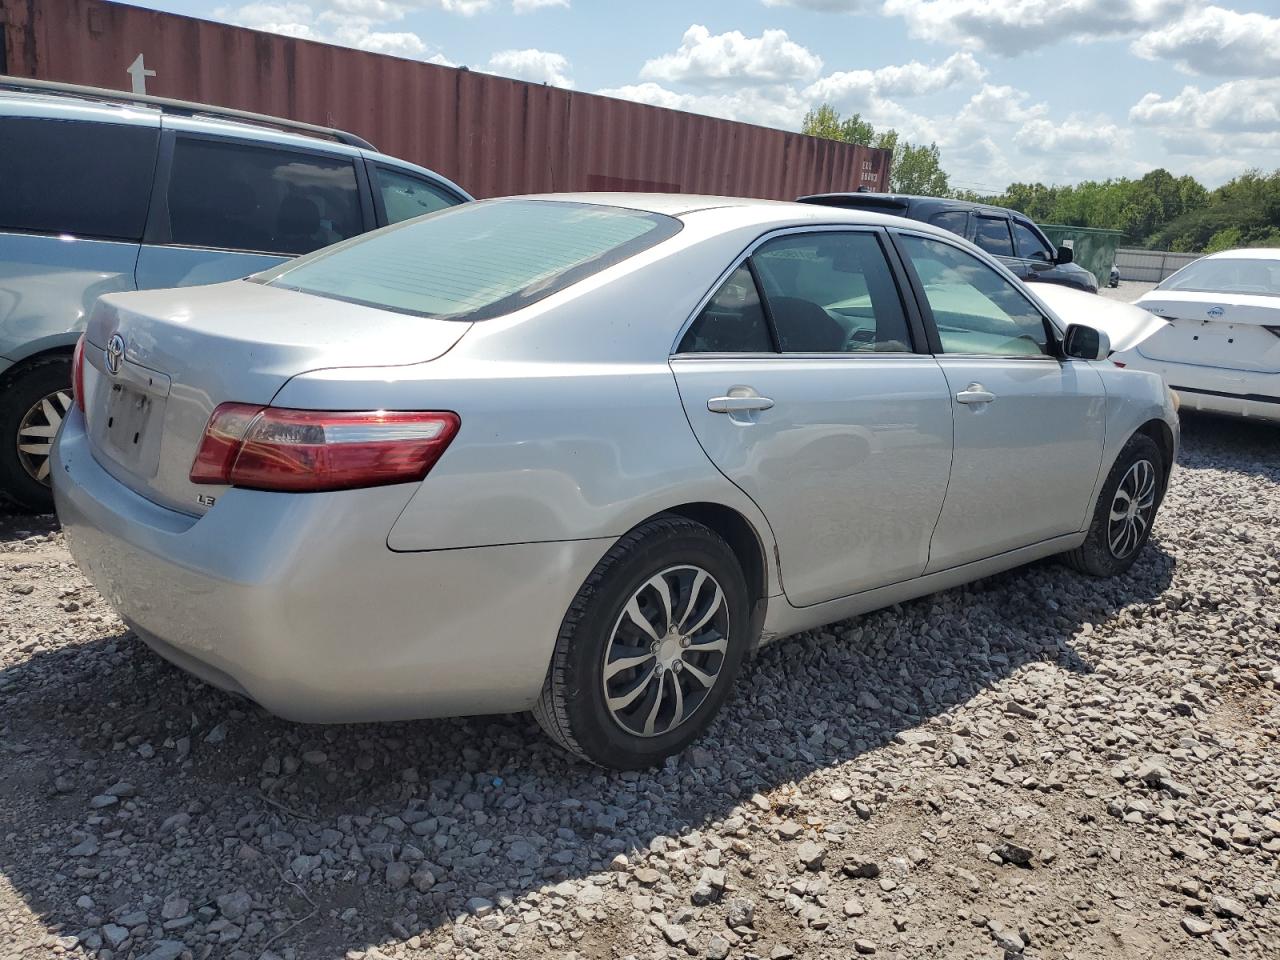 4T1BE46K87U****** Salvage and Repairable 2007 Toyota Camry in AL - Hueytown